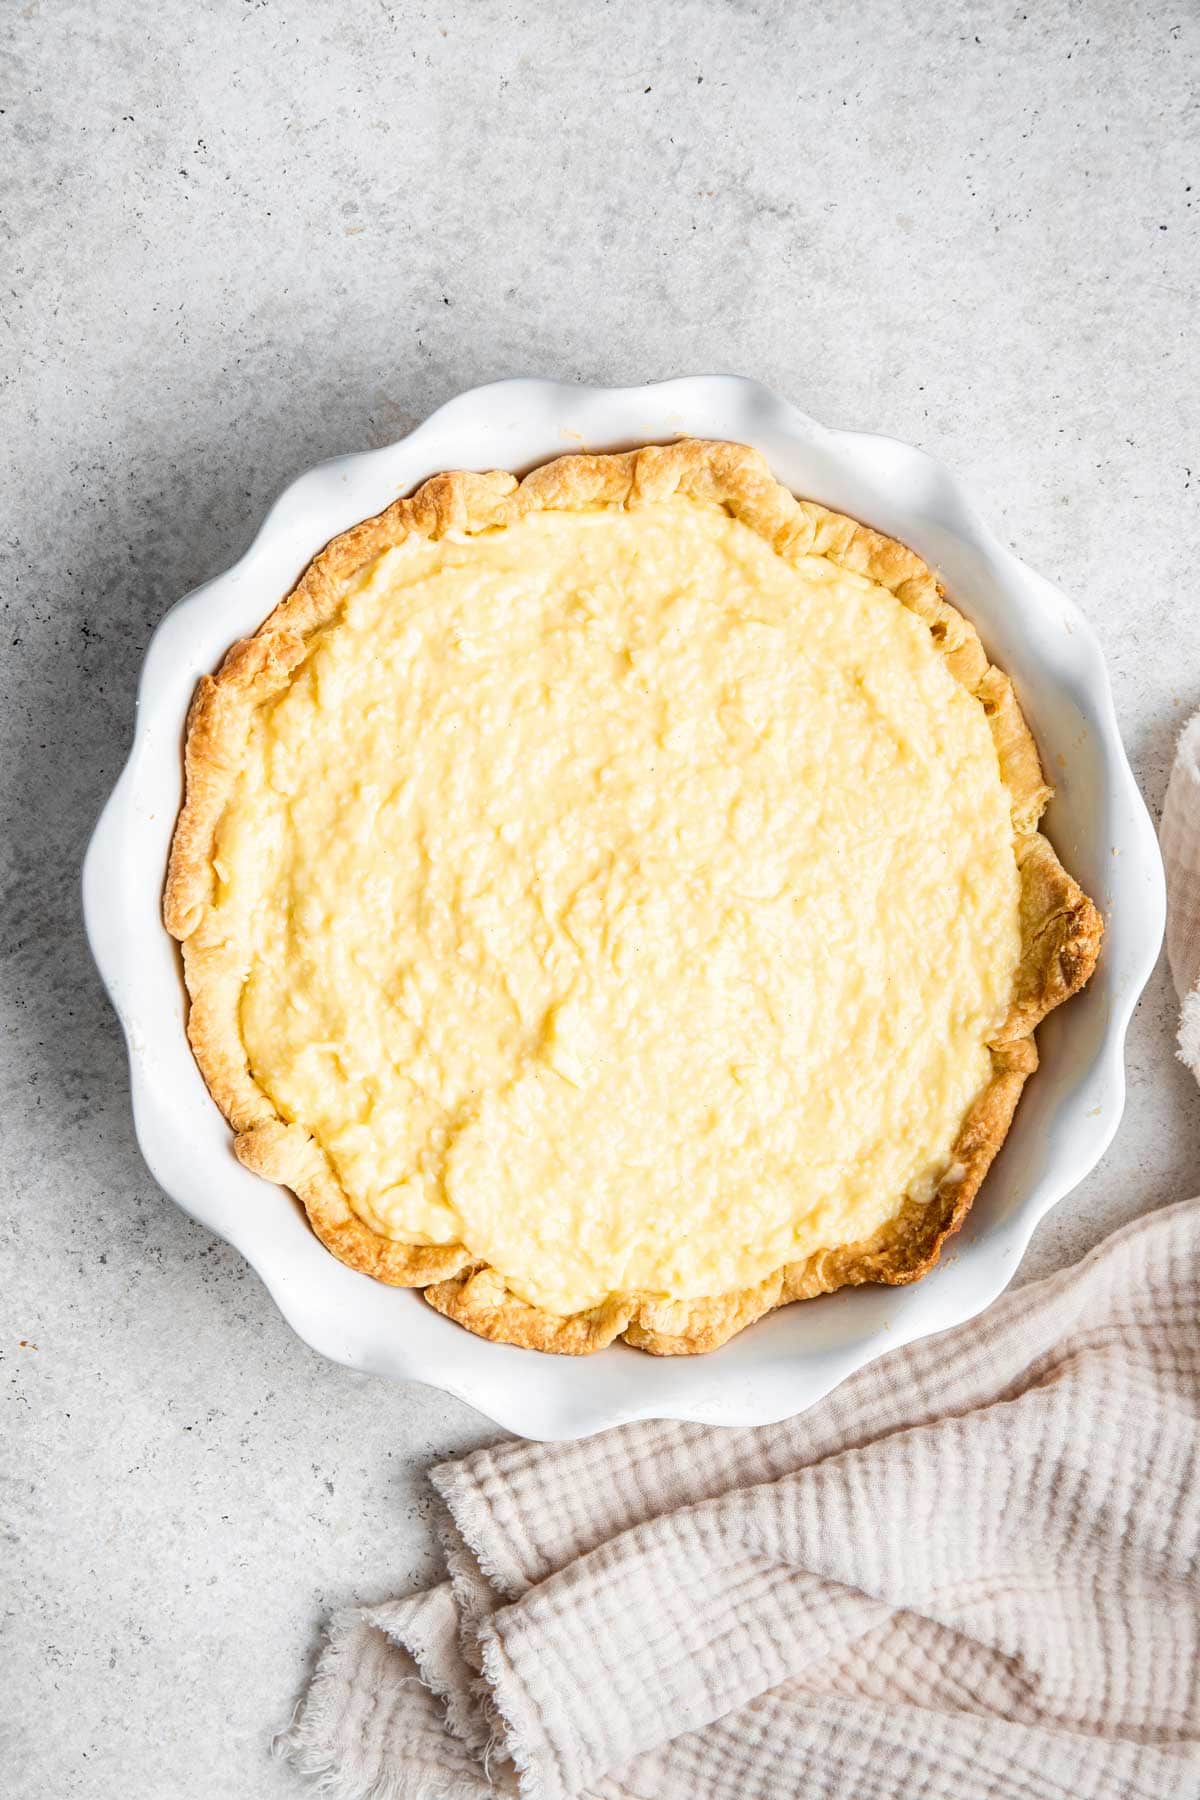 homemade coconut custard poured into a baked pie crust.